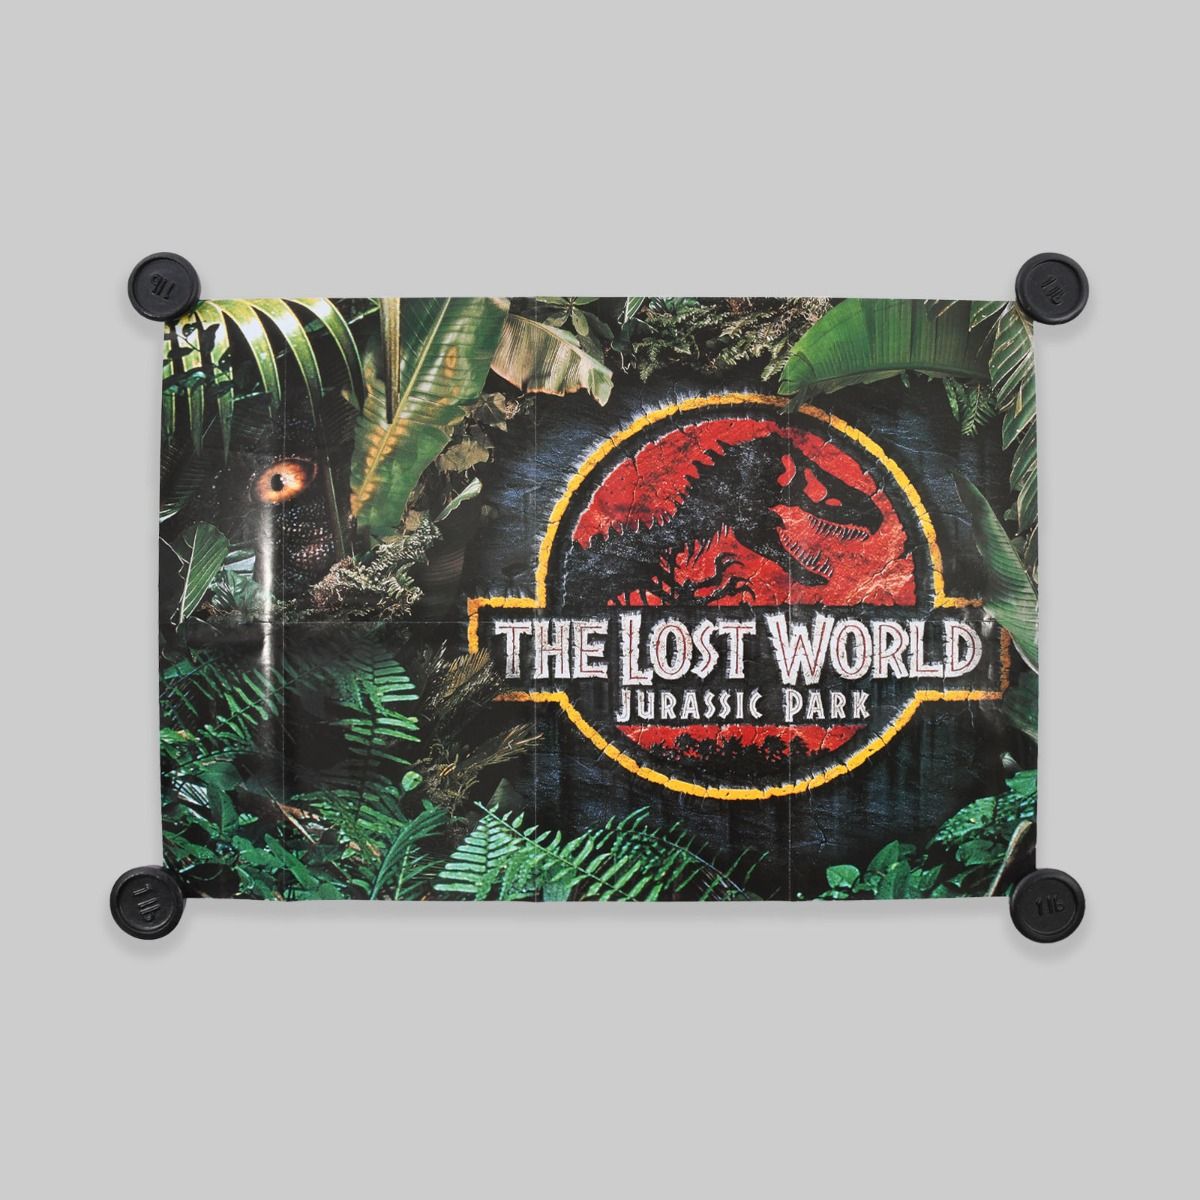 Jurassic Park The Lost World / Speed 2 Poster A1